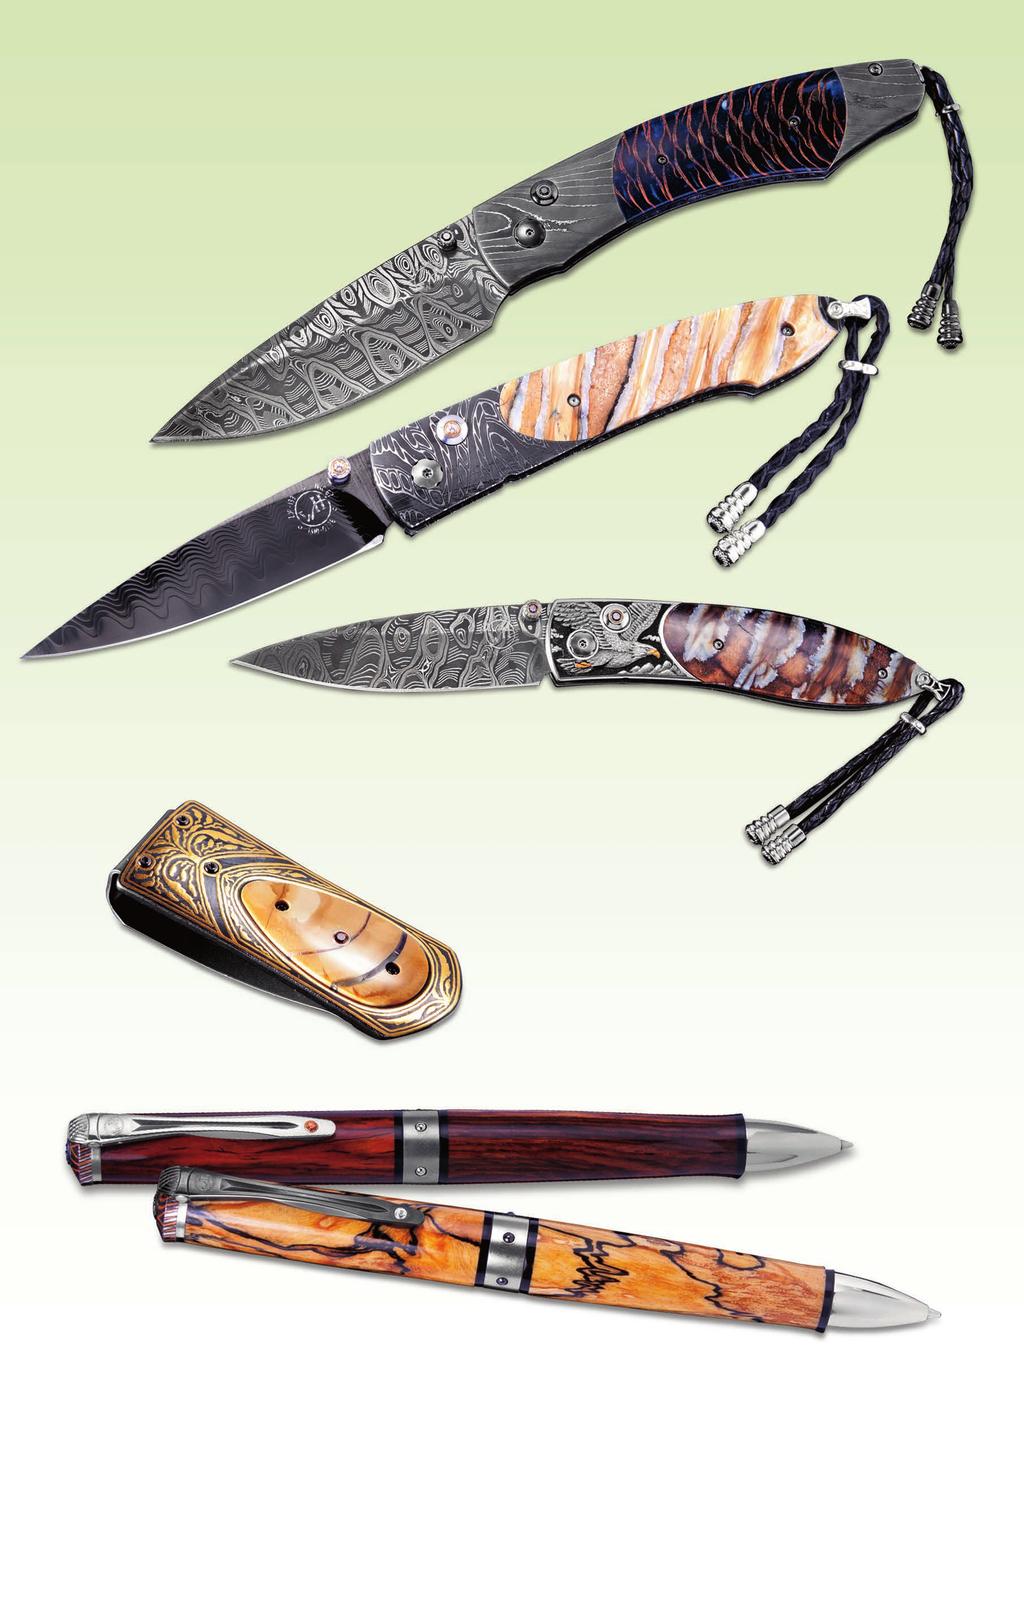 A A. -12 lue Spruce. Norway blue spruce pine cone with twist amascus frame. Hornets nest amascus blade and genuine sapphire thumb stone and button lock, $1,500. -12 Spear point.